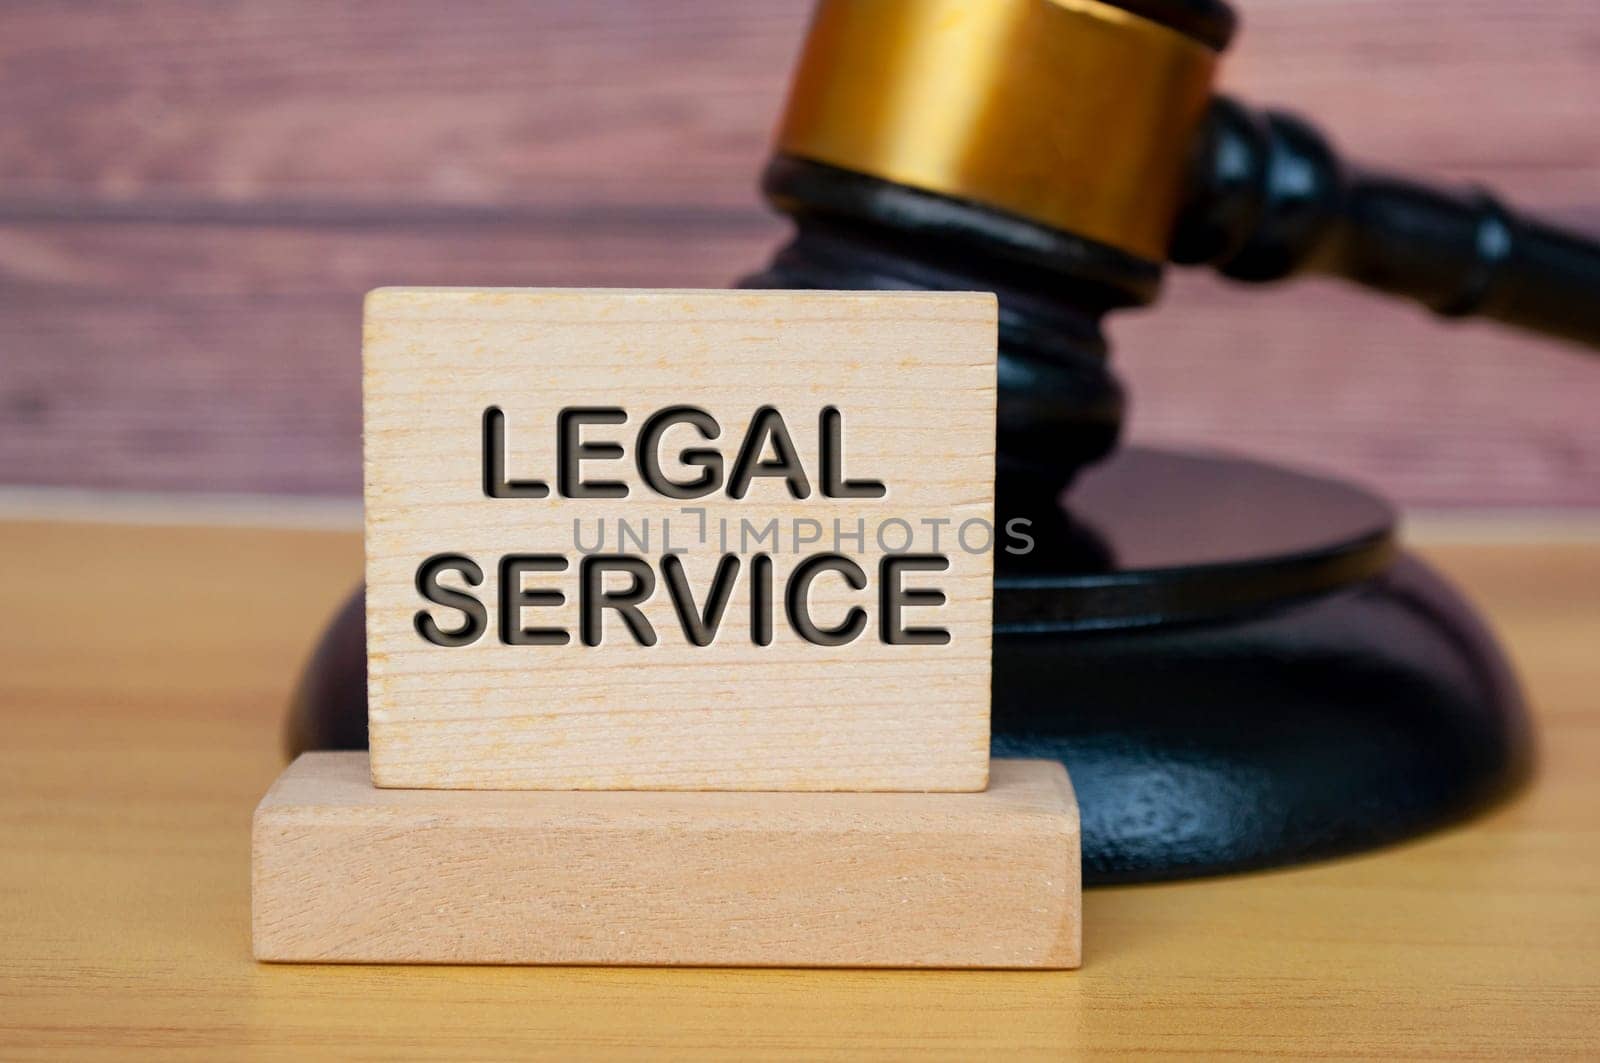 Legal service text engraved on wooden block with gavel background. Legal and law concept. by yom98